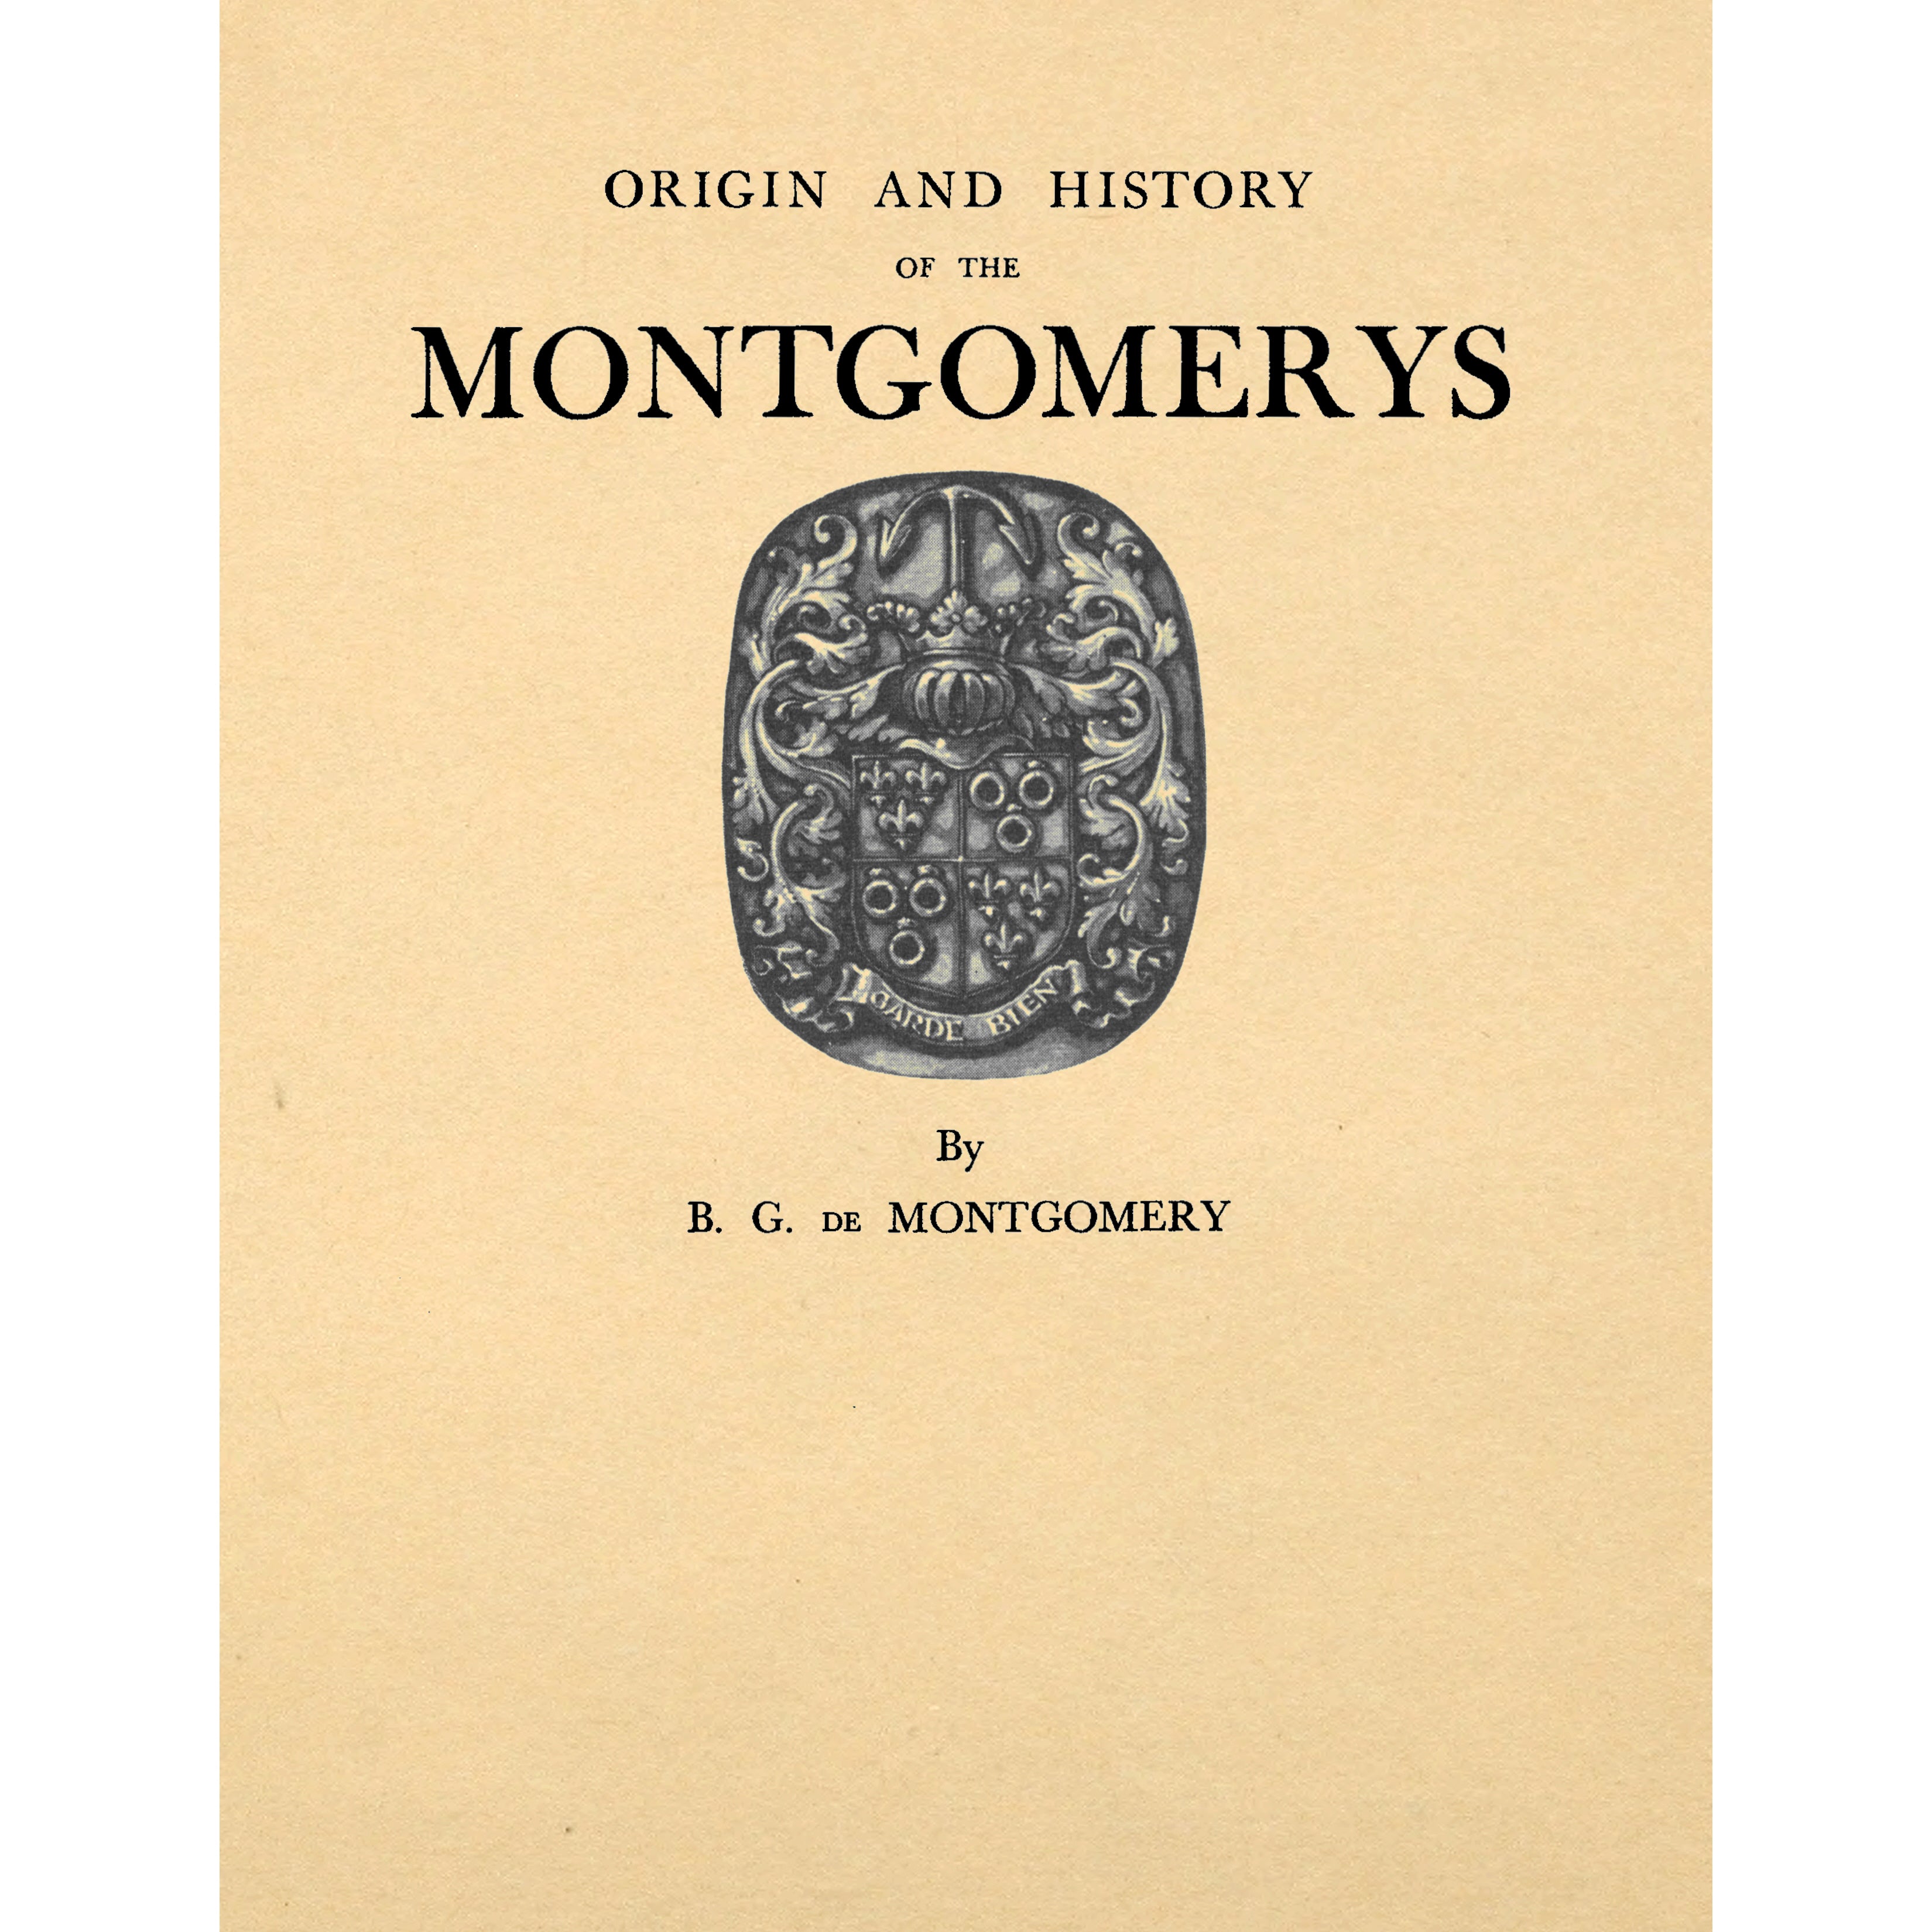 Origin and History of the Montgomerys